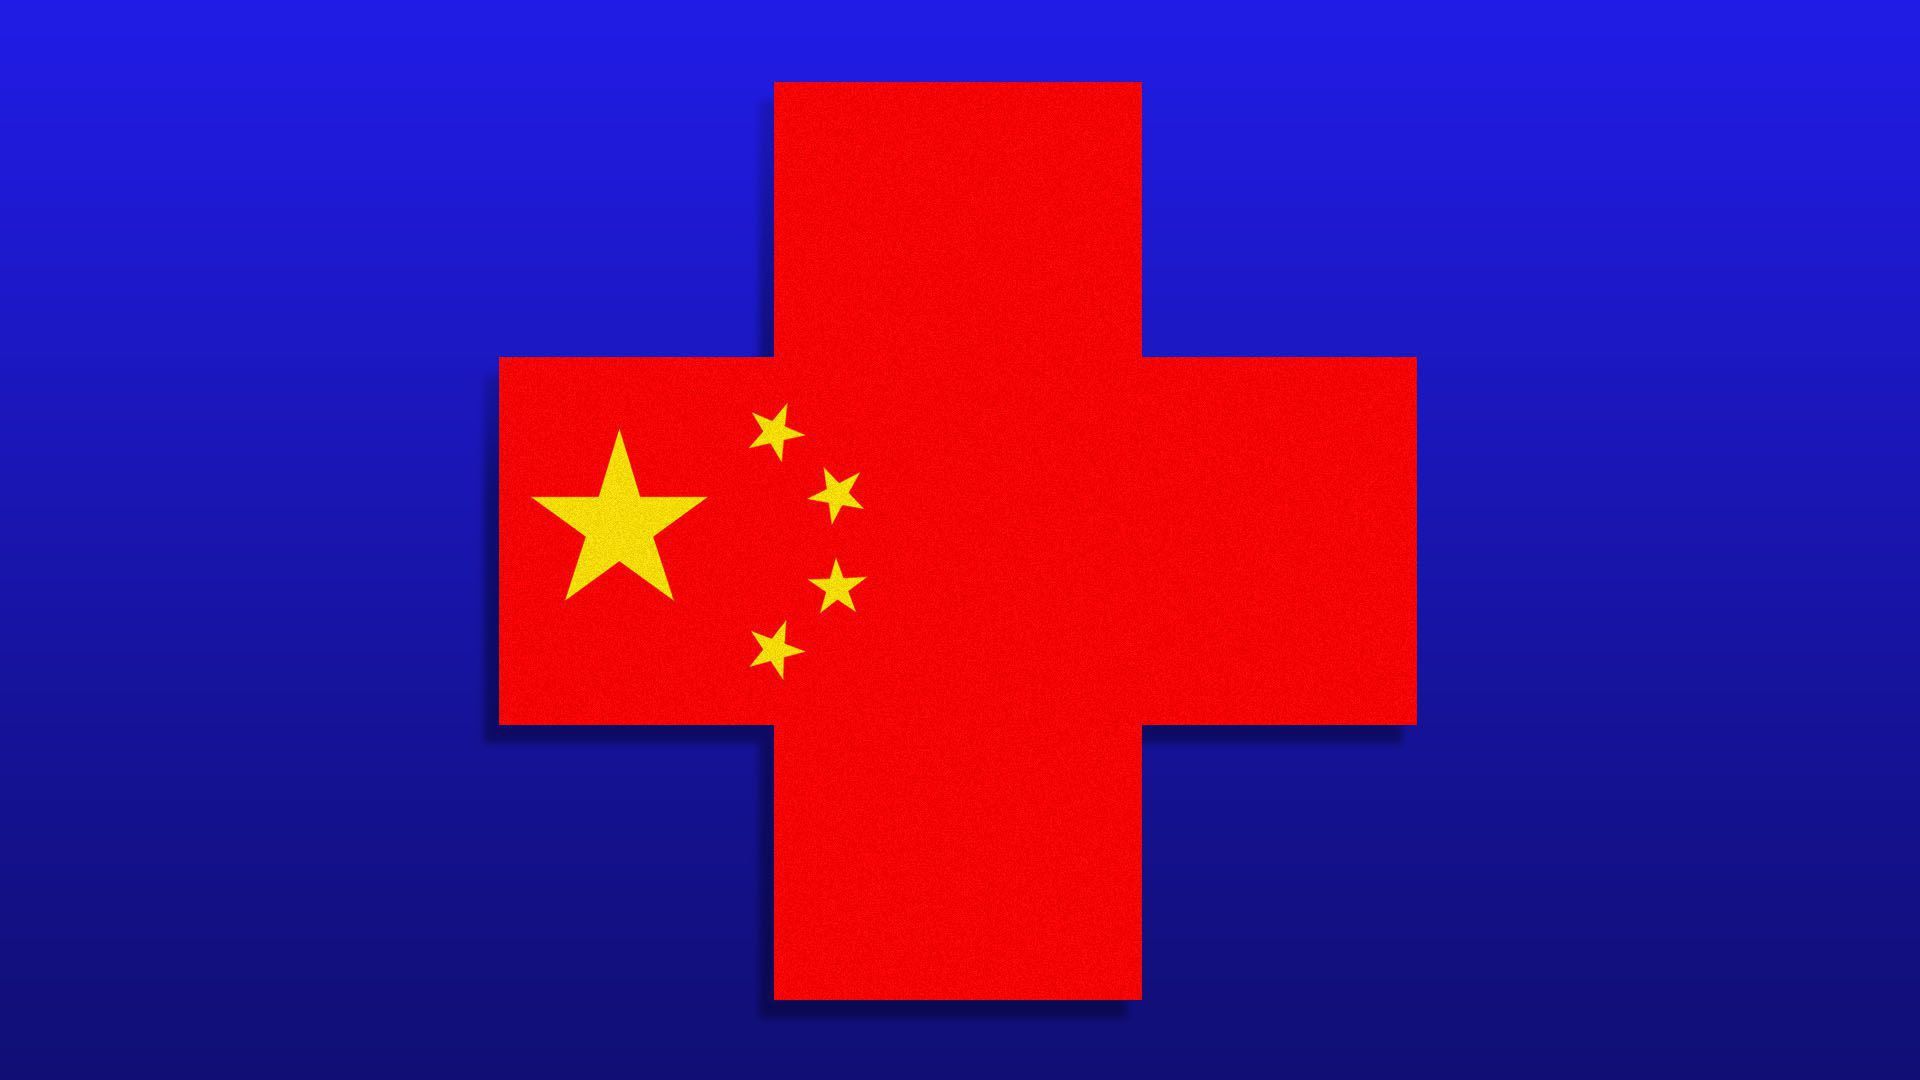 The Chinese flag within the medical plus symbol.